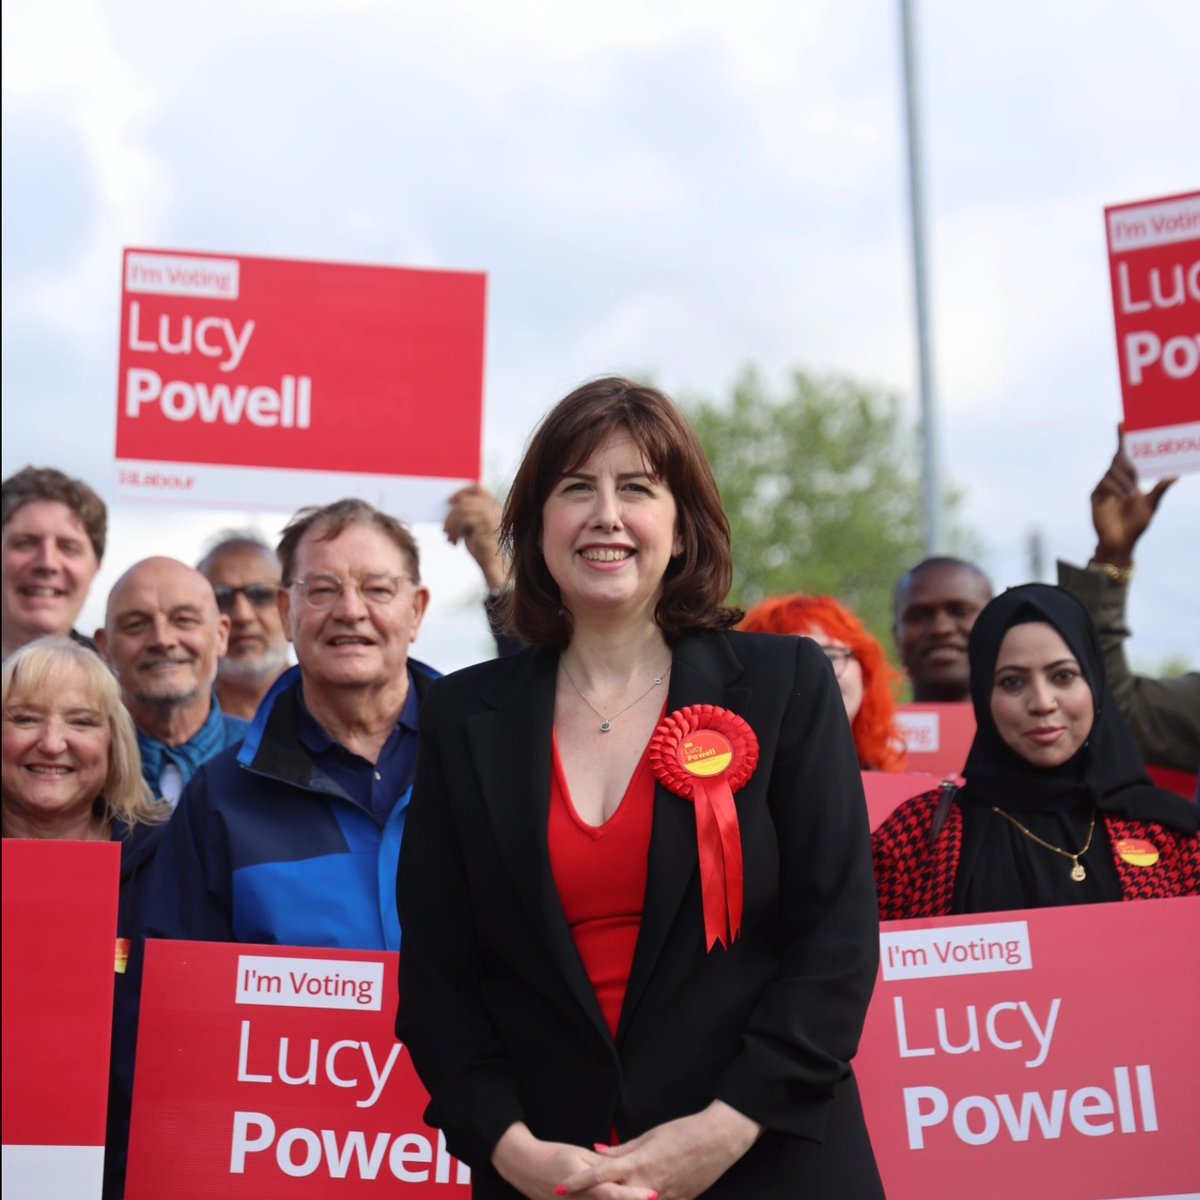 Tomorrow Parliament will be dissolved until after the General Election. I will be standing for re-election as the Parliamentary Labour & Co-Operative Candidate for Manchester Central. For urgent casework, you can still get in touch here: ✉️ Contact@lucypowell.org.uk Promoted